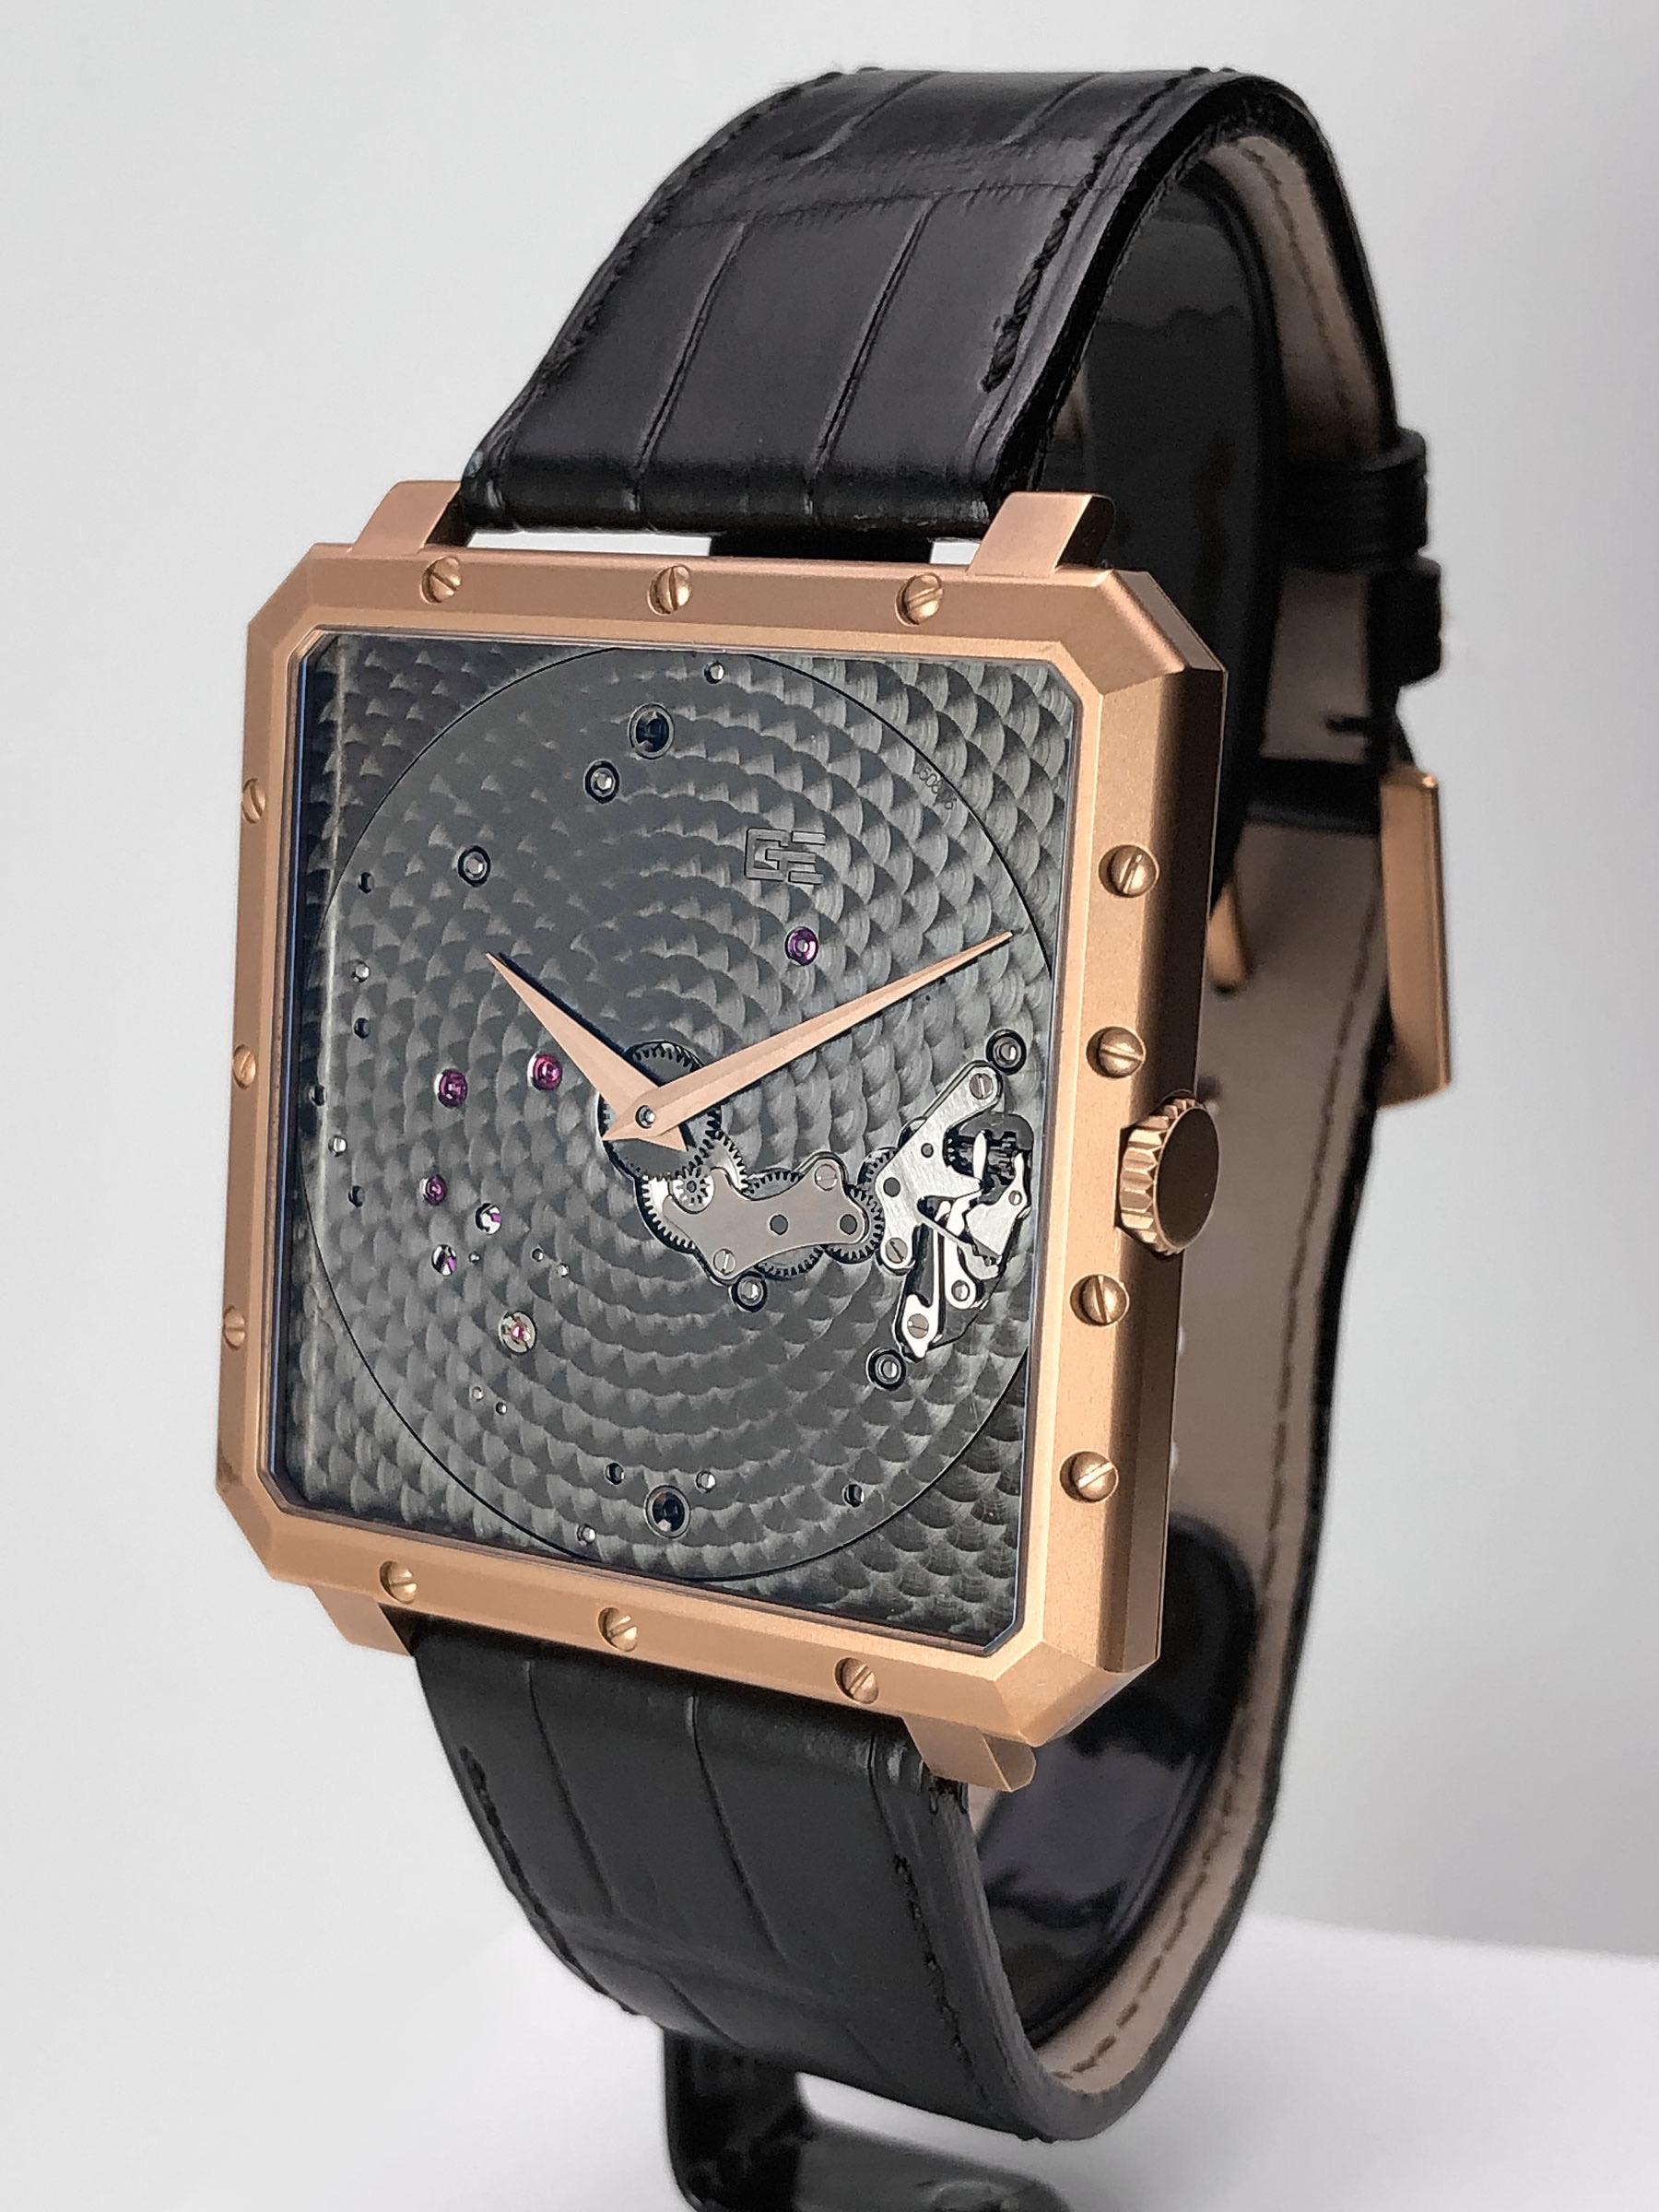 18 Karat Rose Gold Time Space Square
Reference #OR-TSP-2315
Made in Switzerland
Manual Wind
Case #002
Anthracite engine turned main plate with rose gold hands
43mm square
Black Crocodile Strap with 18 KT Rose Gold Tang Buckle
Box and Warranty 



